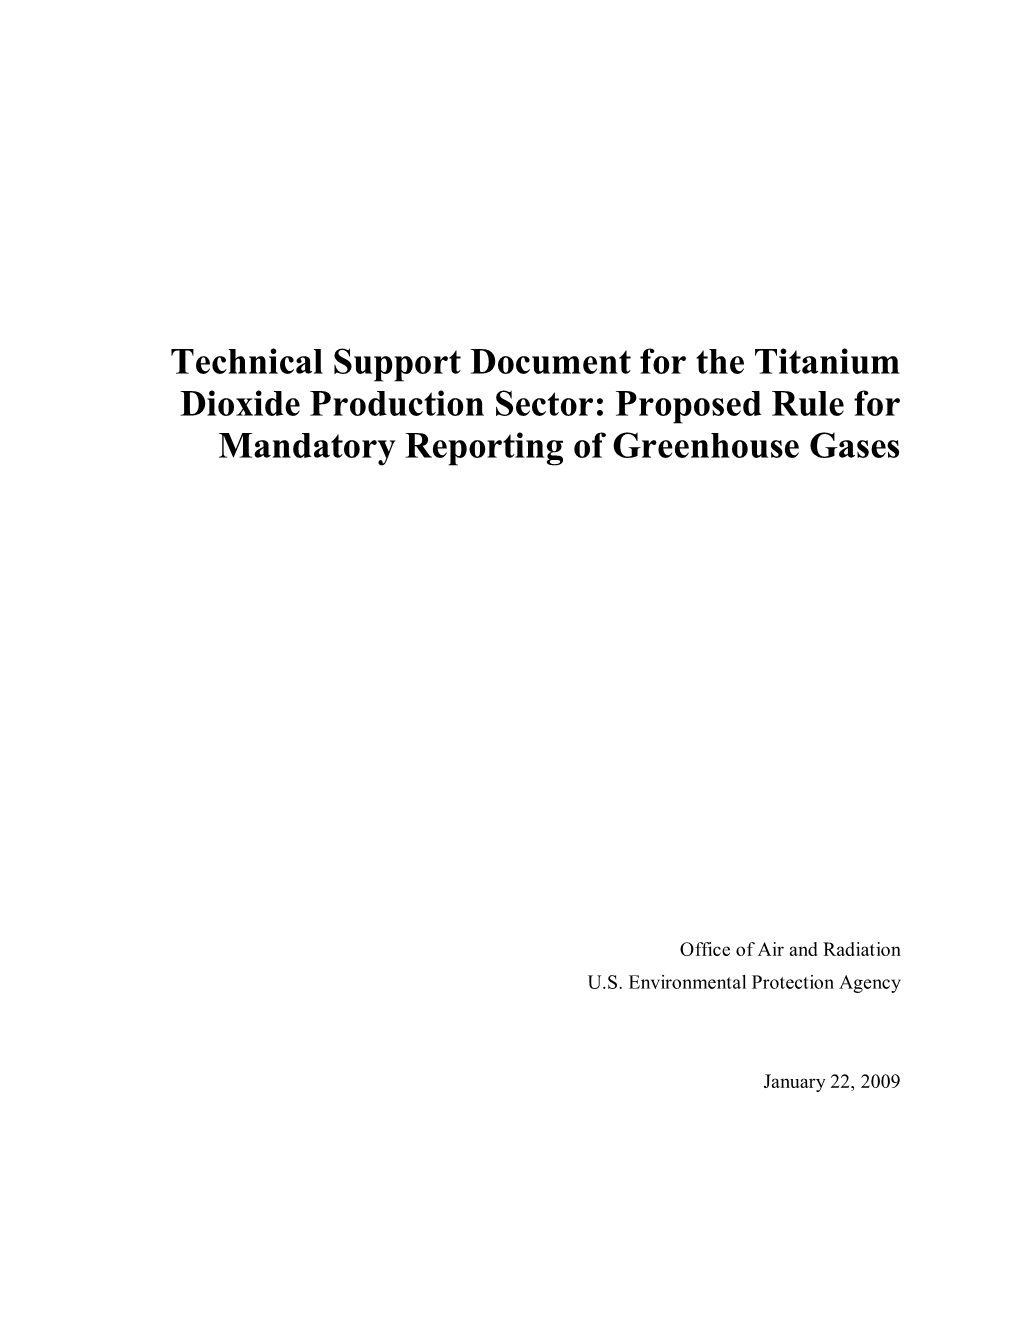 Titanium Dioxide Production Sector: Proposed Rule for Mandatory Reporting of Greenhouse Gases